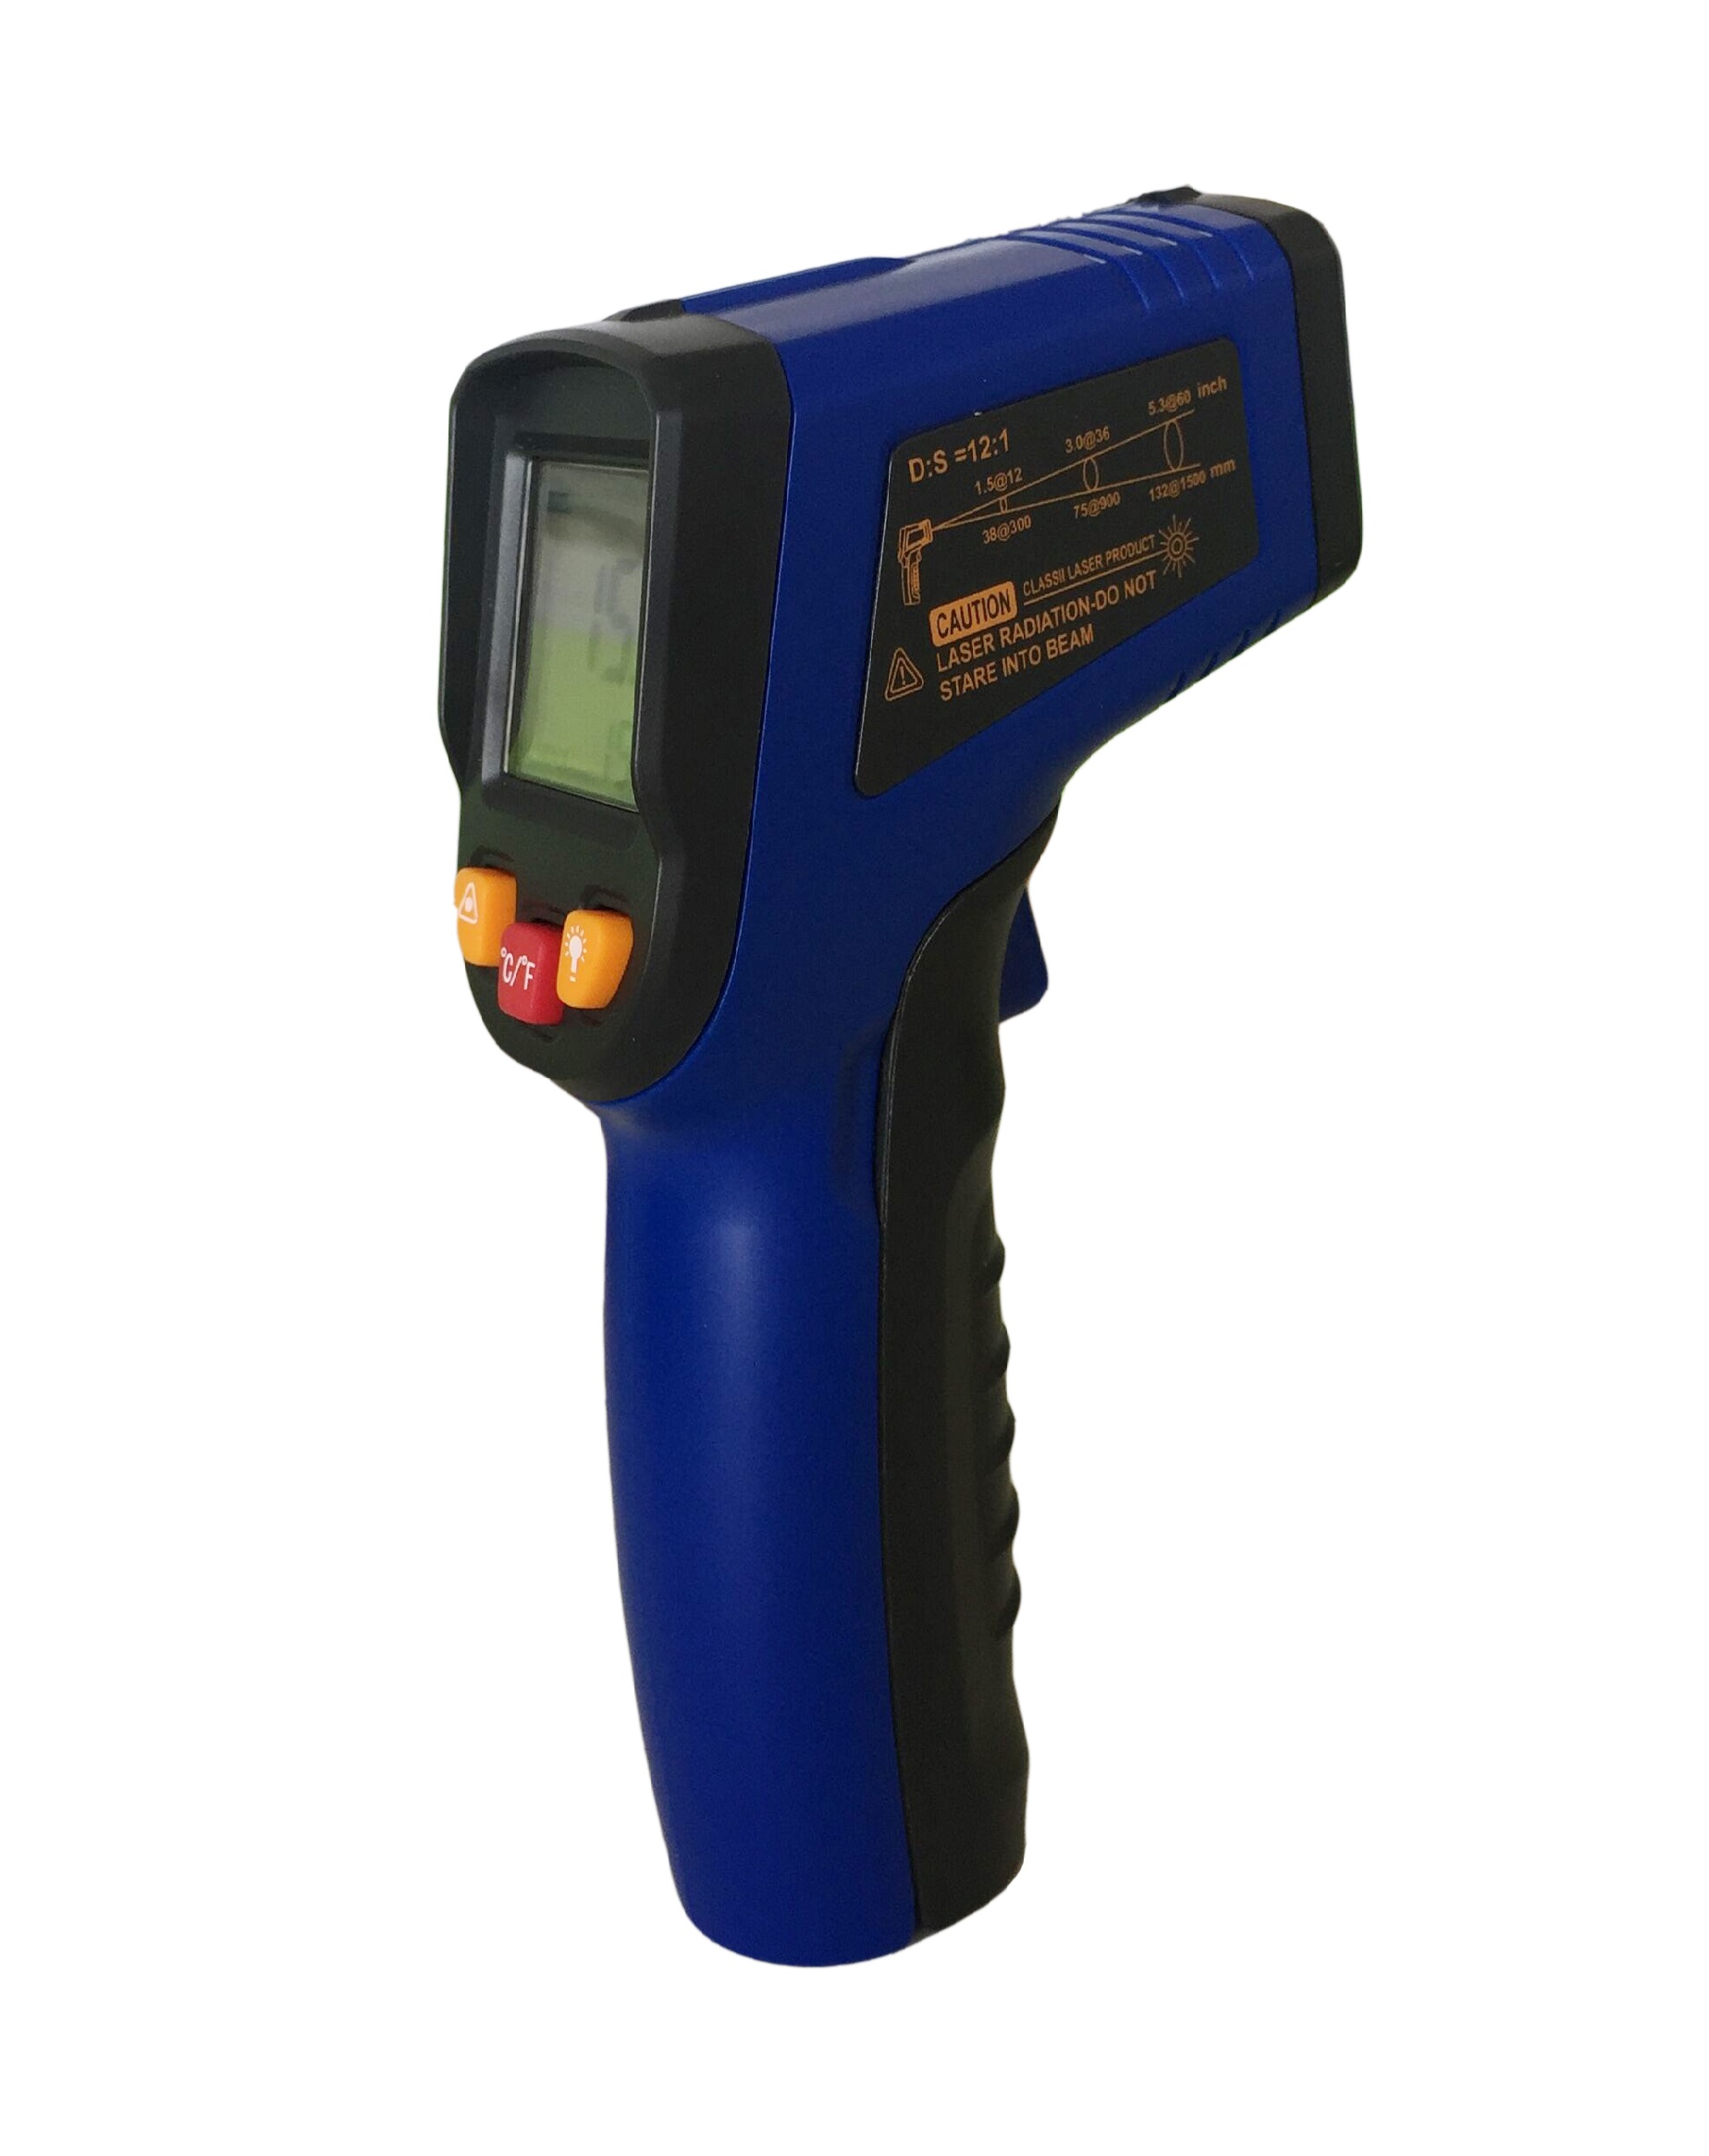 Non-contact IR Thermometer Infrared Thermometer with adjutable emissivity